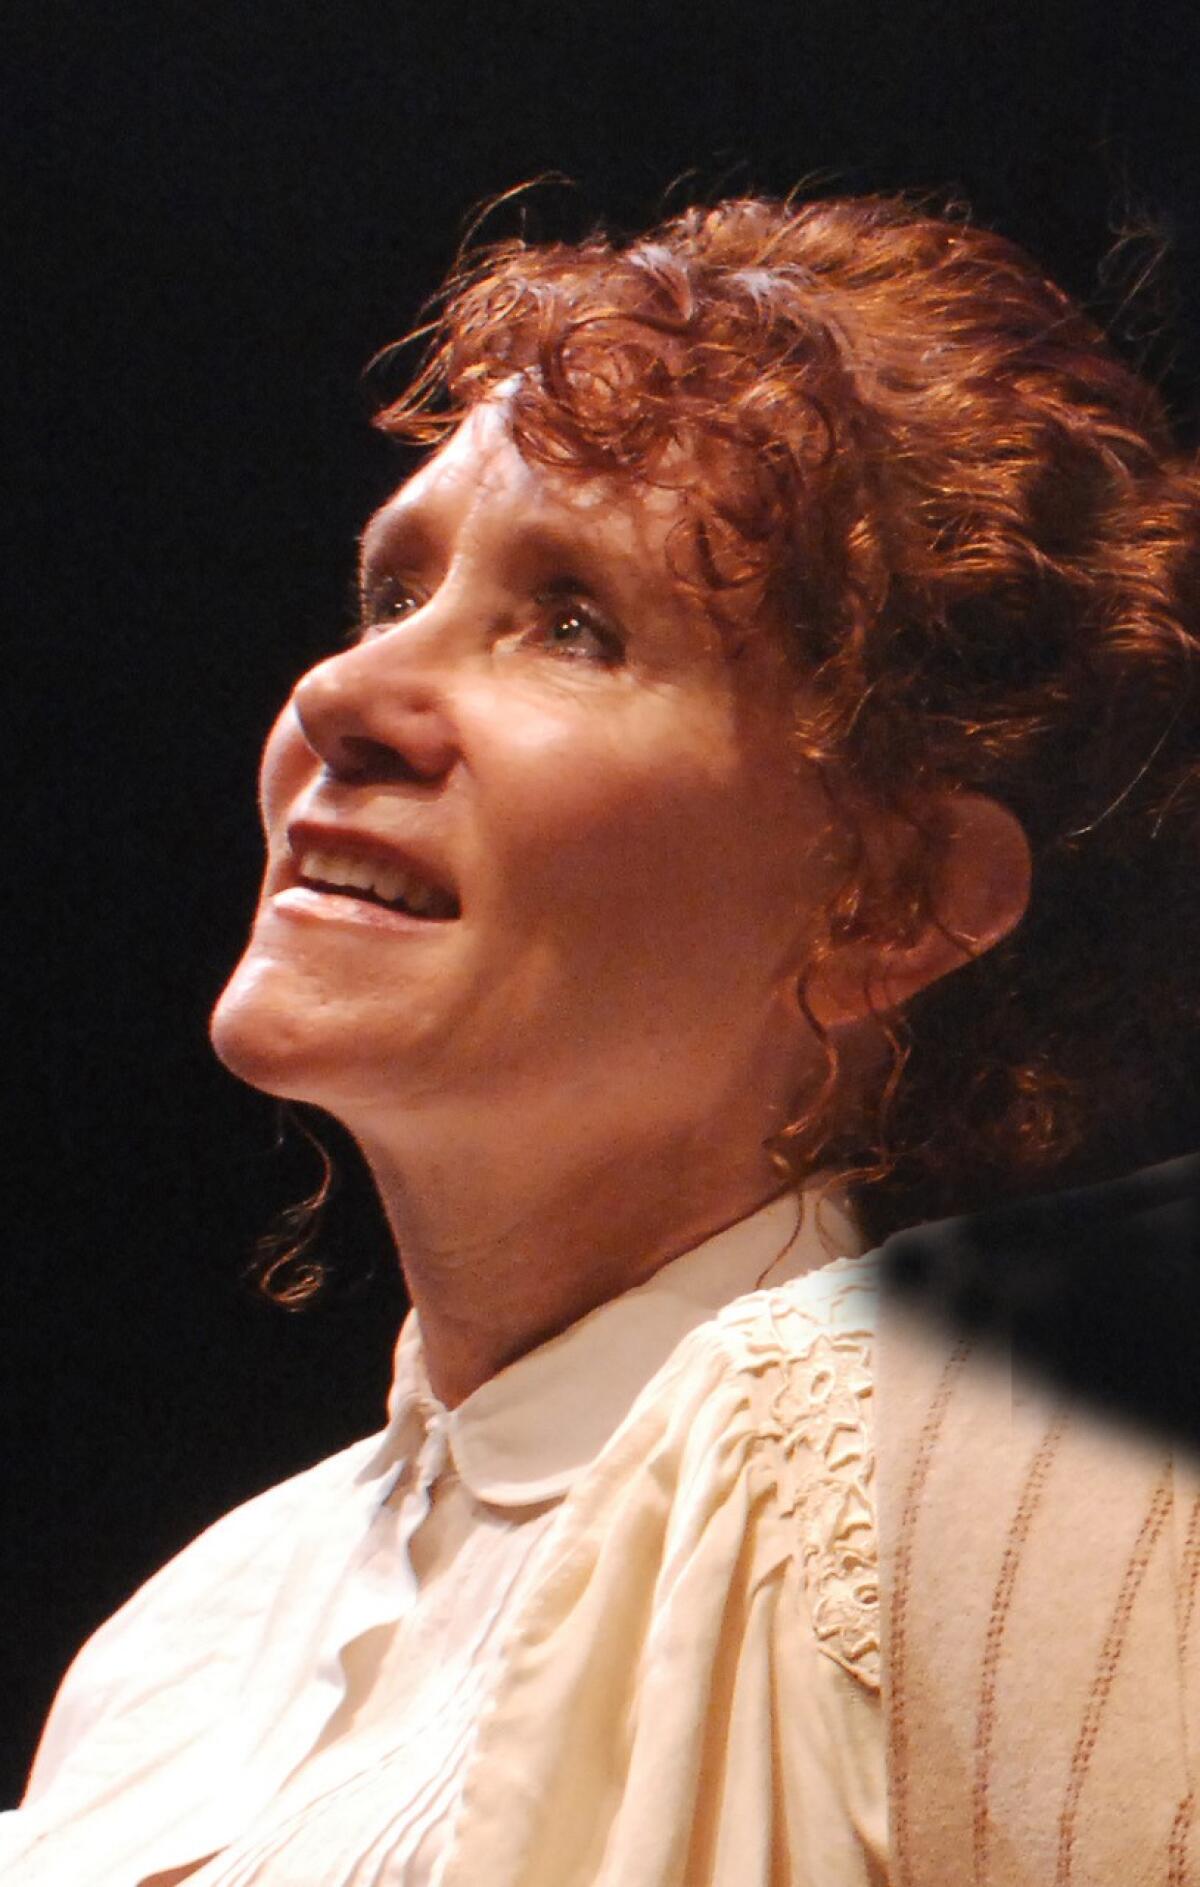 Cynthia Gerber will star in Lamb's Players Theatre's "The Belle of Amherst" Oct. 2 through Nov. 14, 2021.